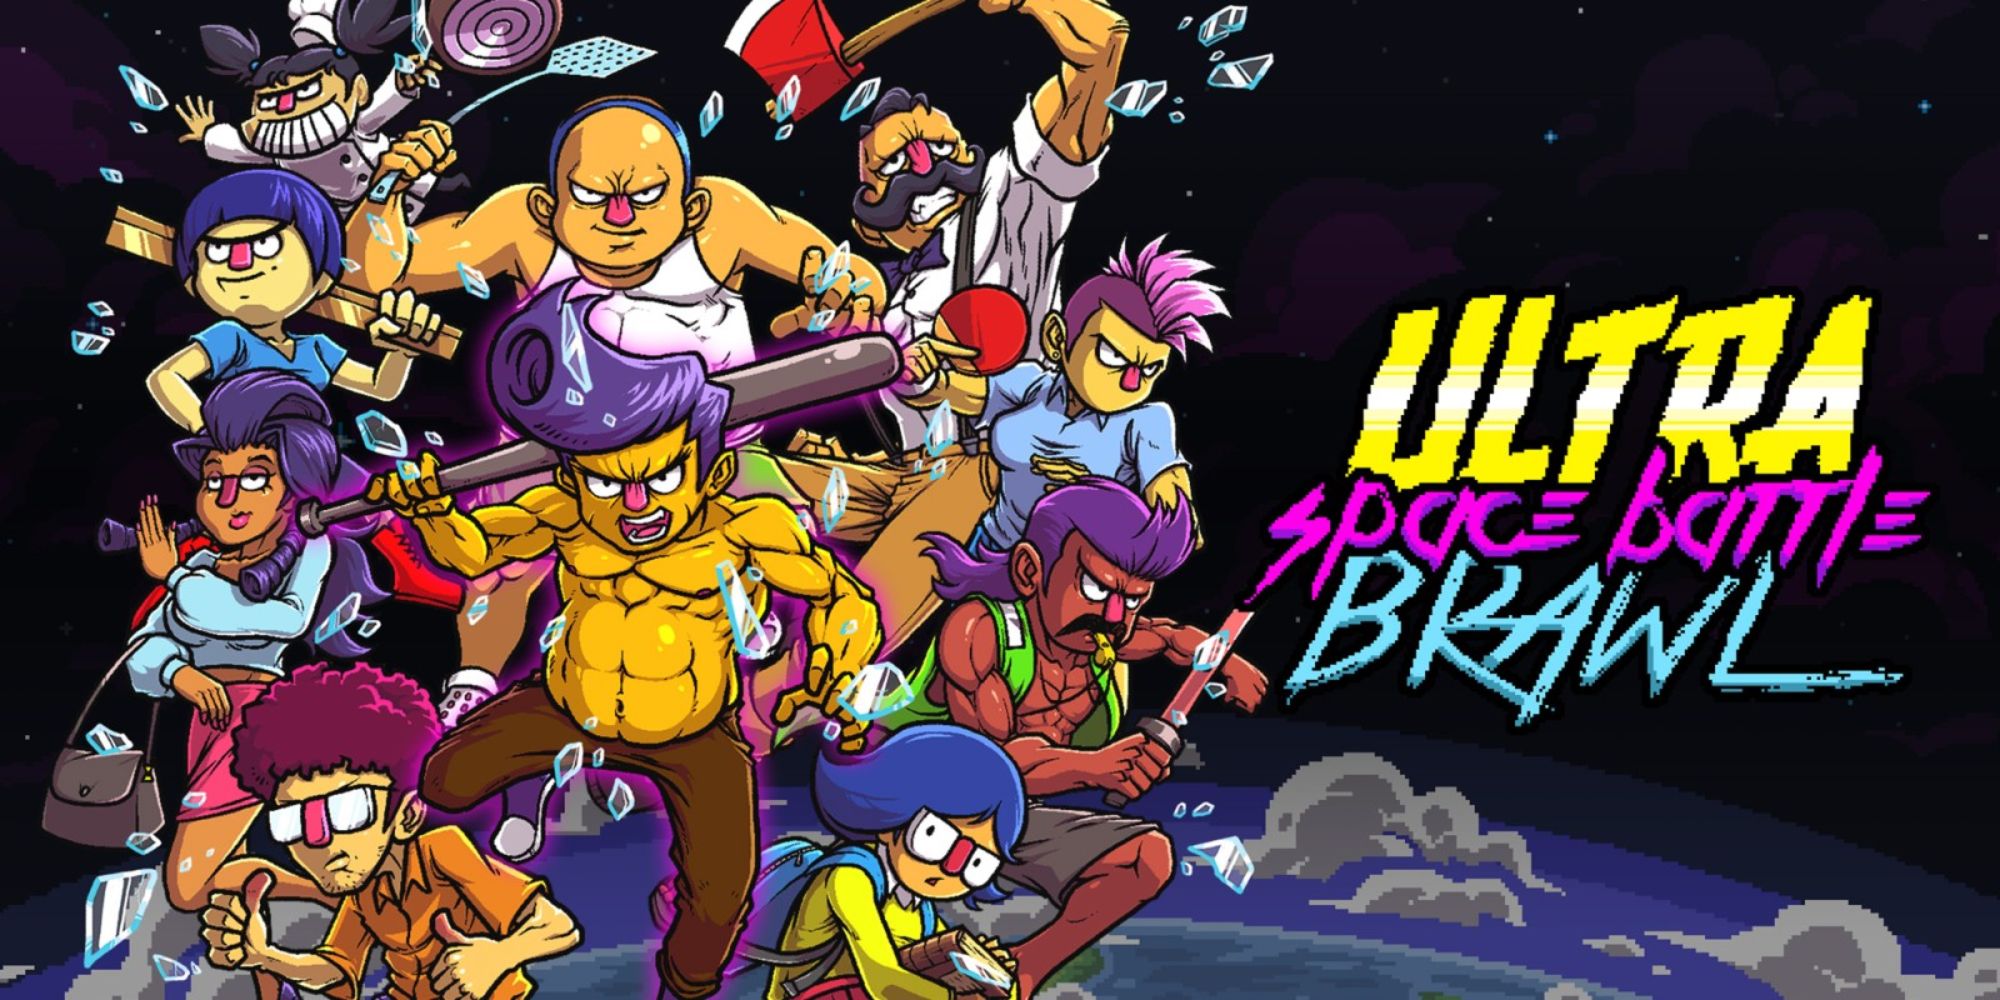 a promotional image for the game Ultra Space Battle Brawl featuring art of the game's huge roster on the left and the game's title on the right all against a backdrop of space